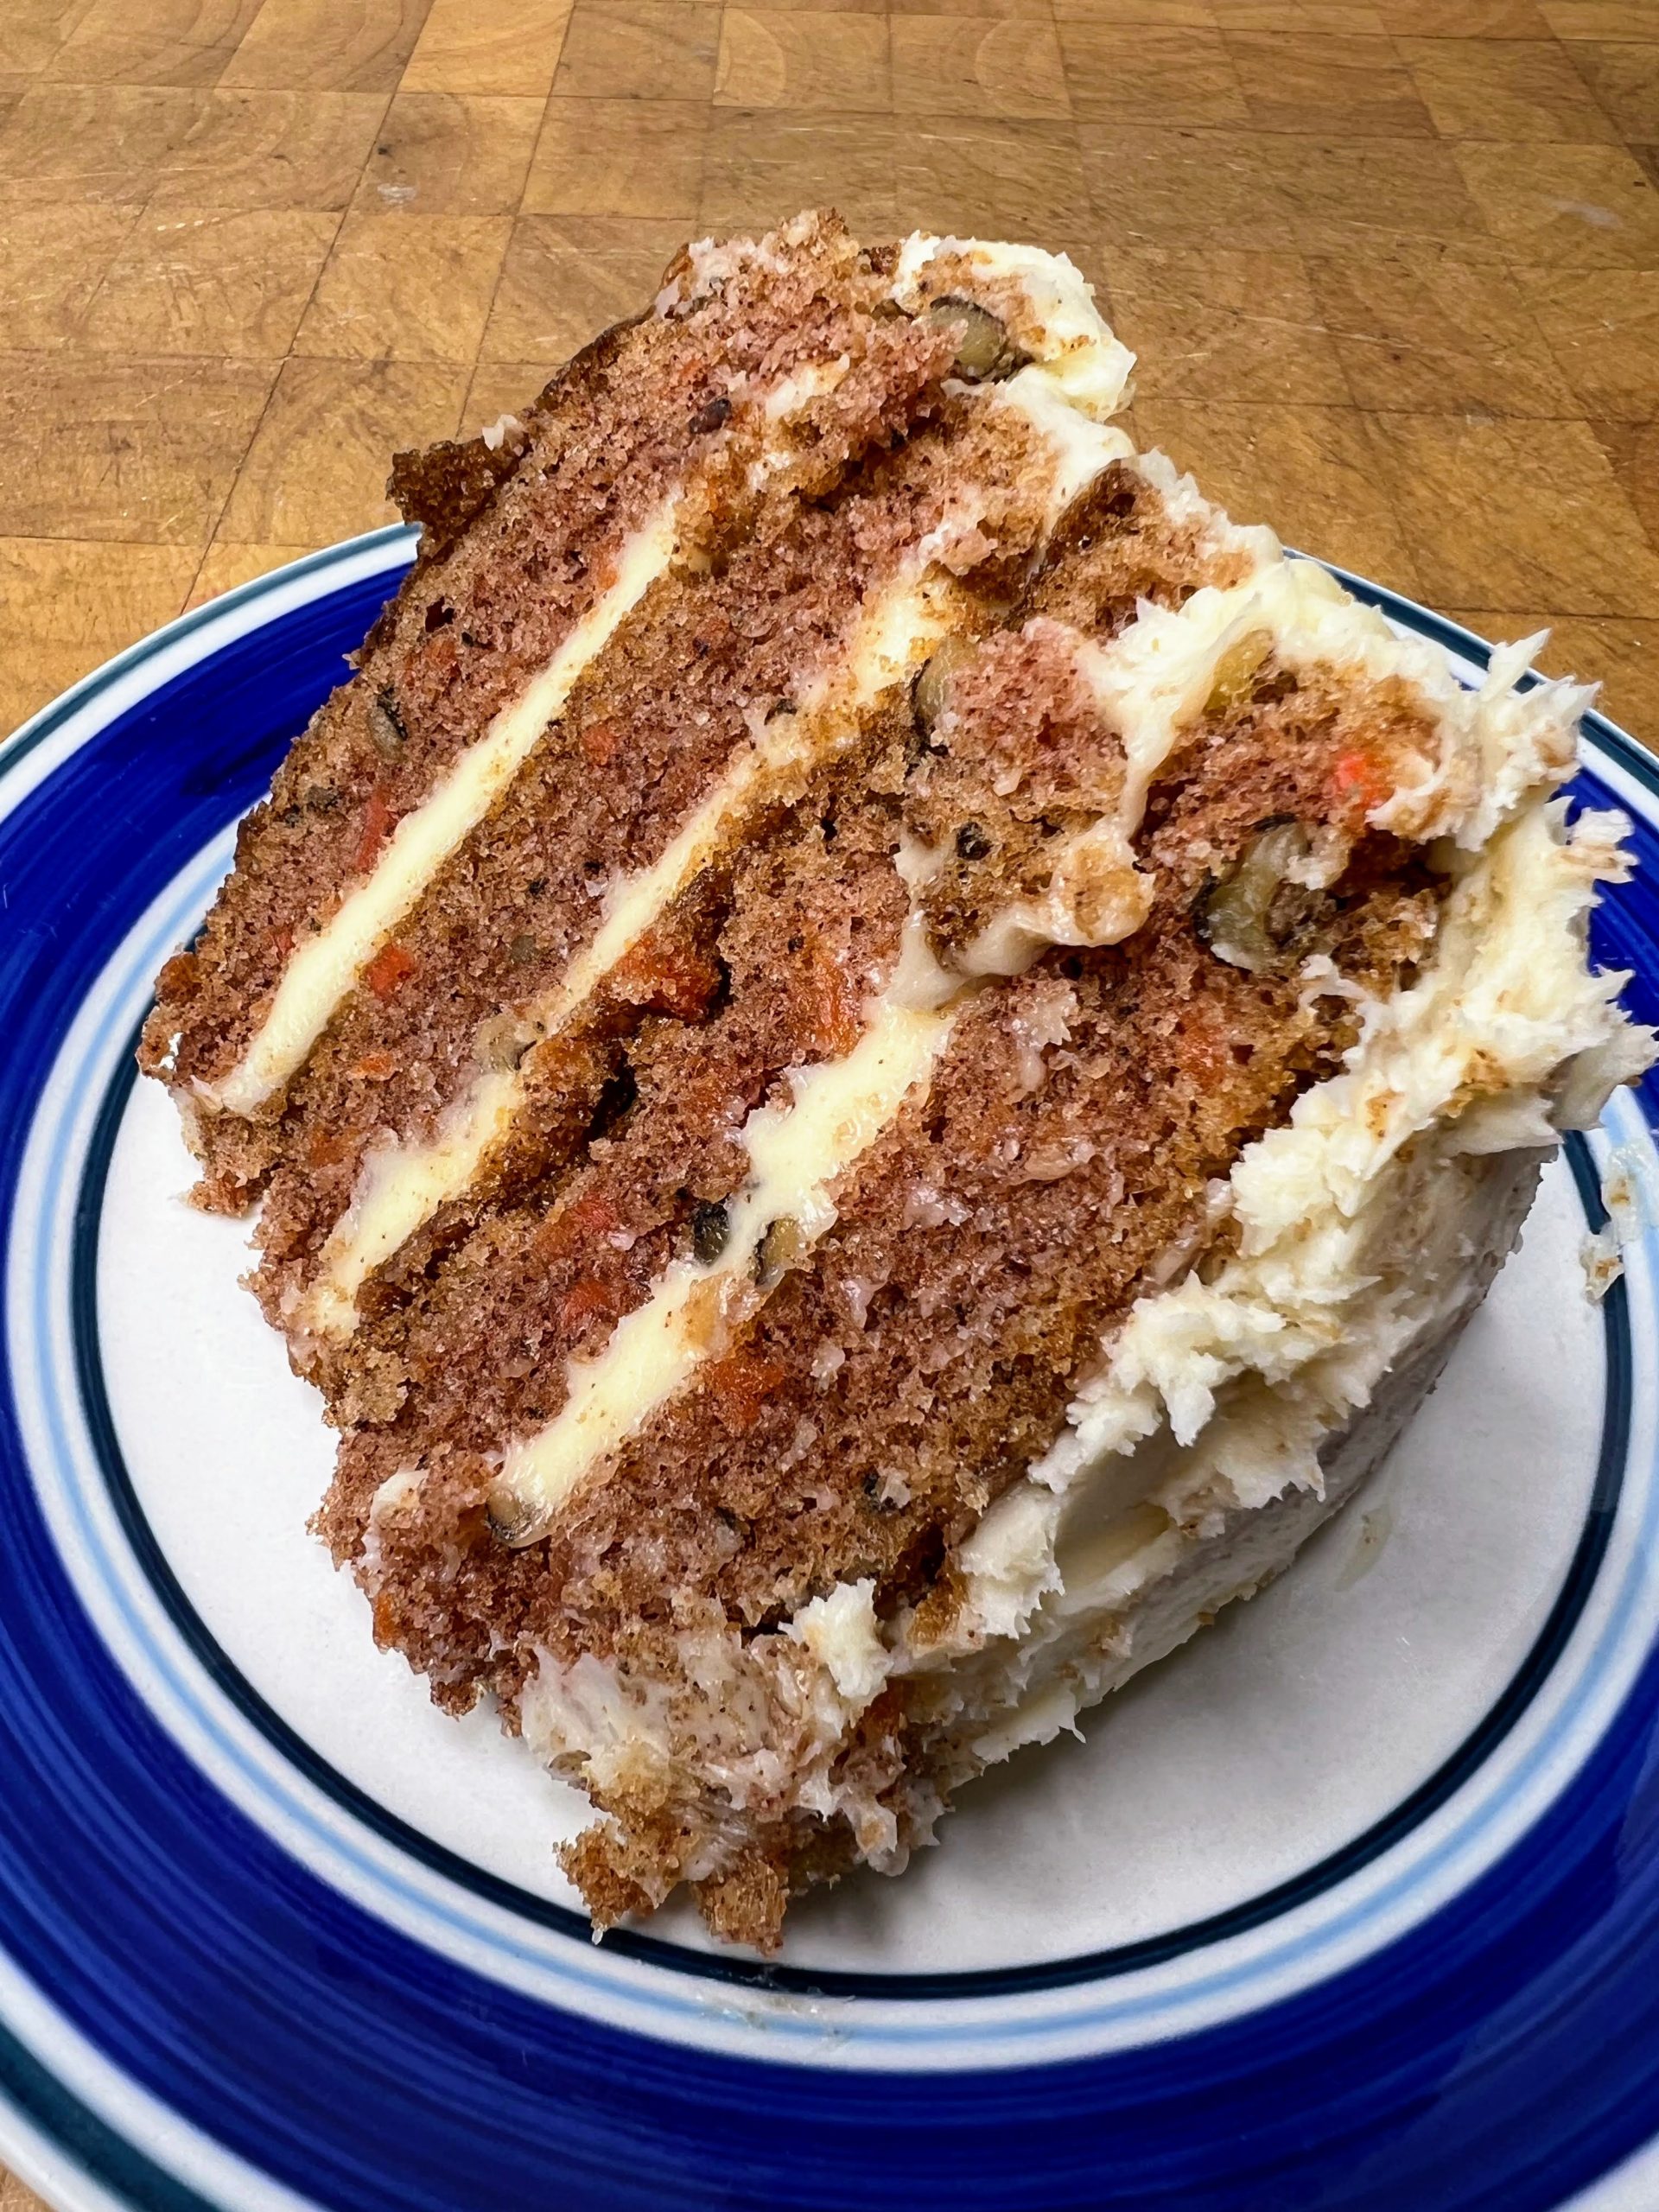 slice of carrot cake on blue and white plate